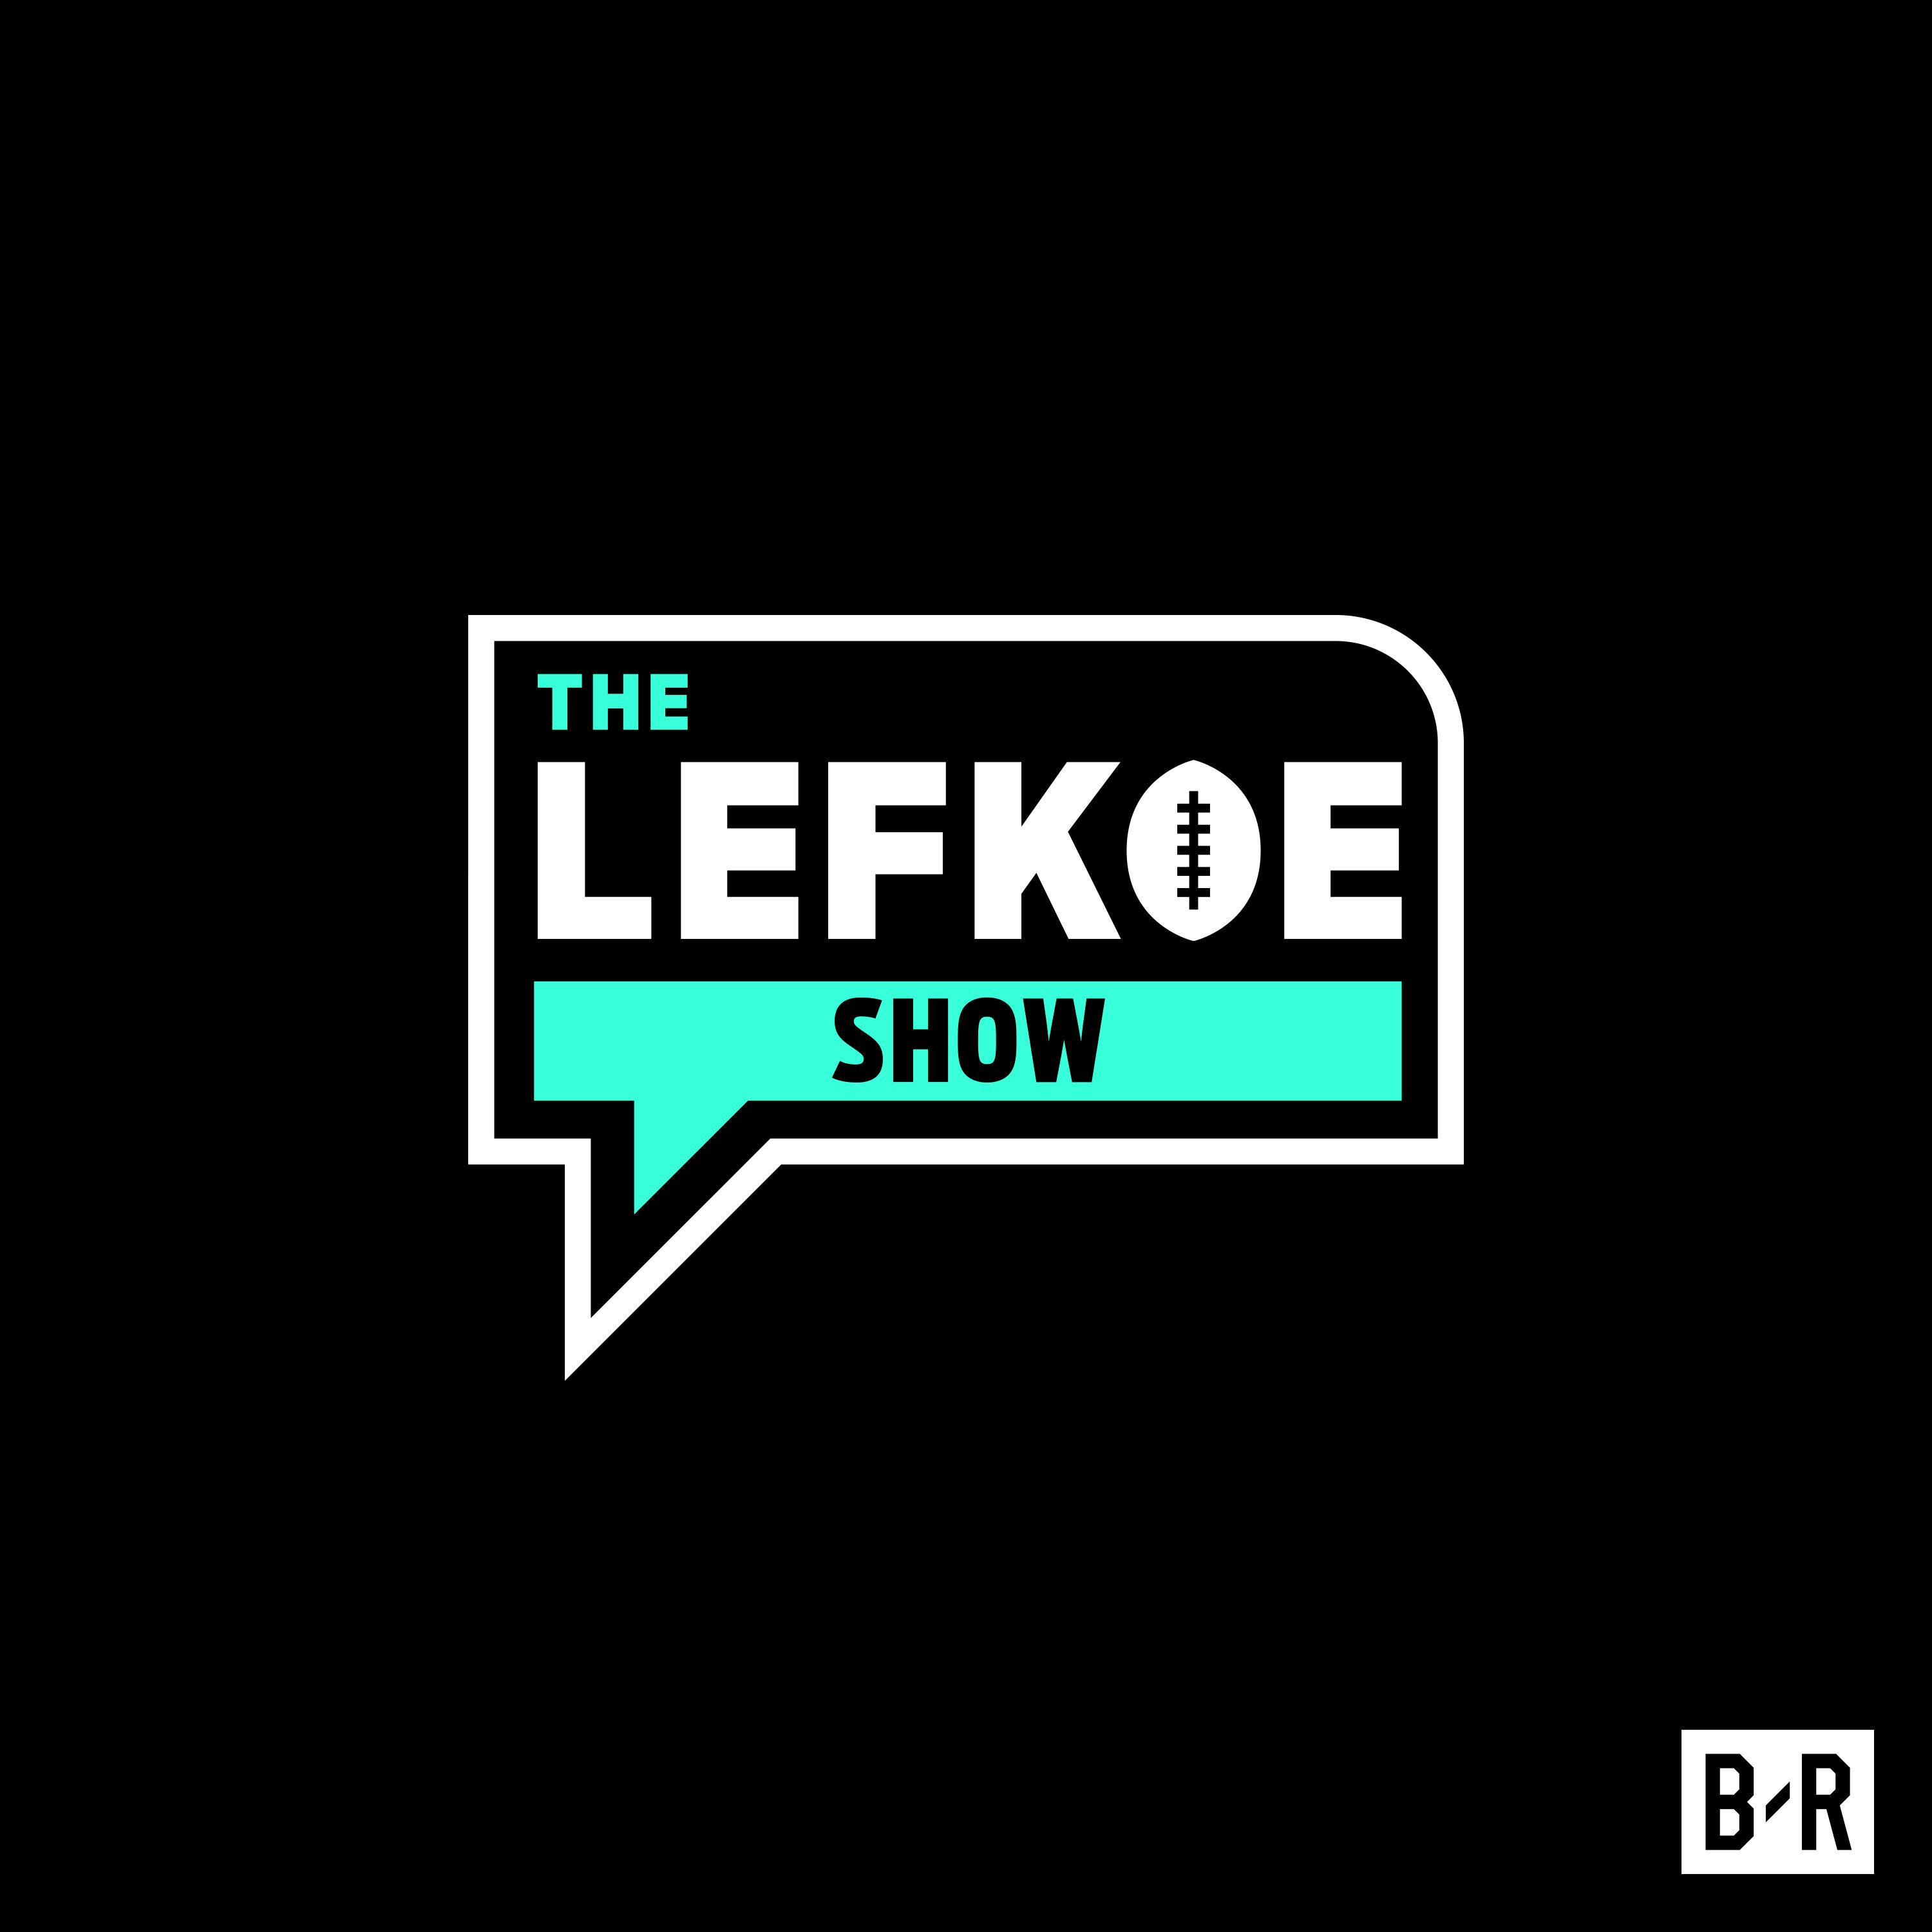 Matt Judon on Joining the Patriots, Getting Revenge on Teams Who Doubt Him, and More! | The Lefkoe Show